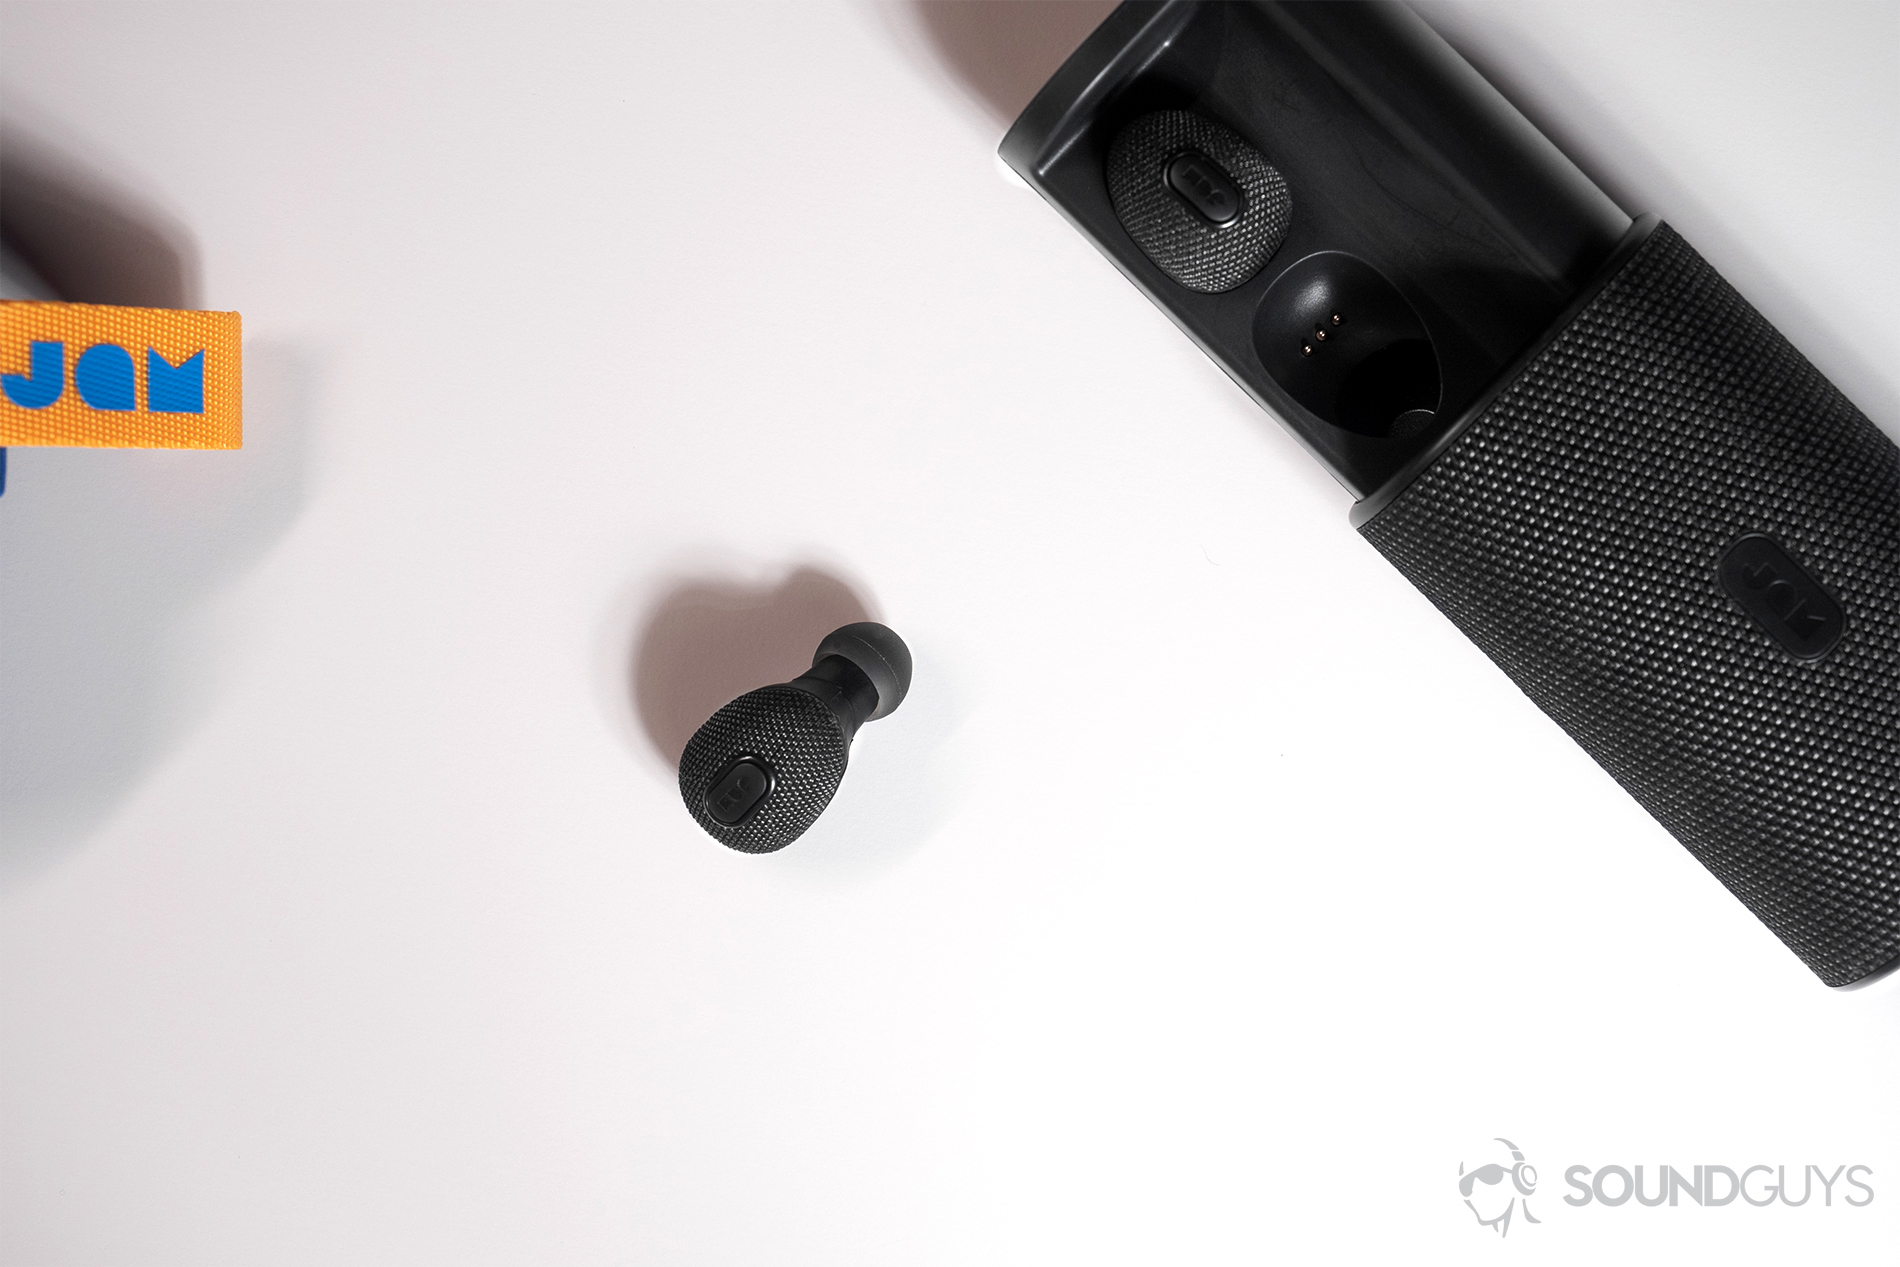 Jam Live True: Top-down image of the open charging case with one earbud on the table.